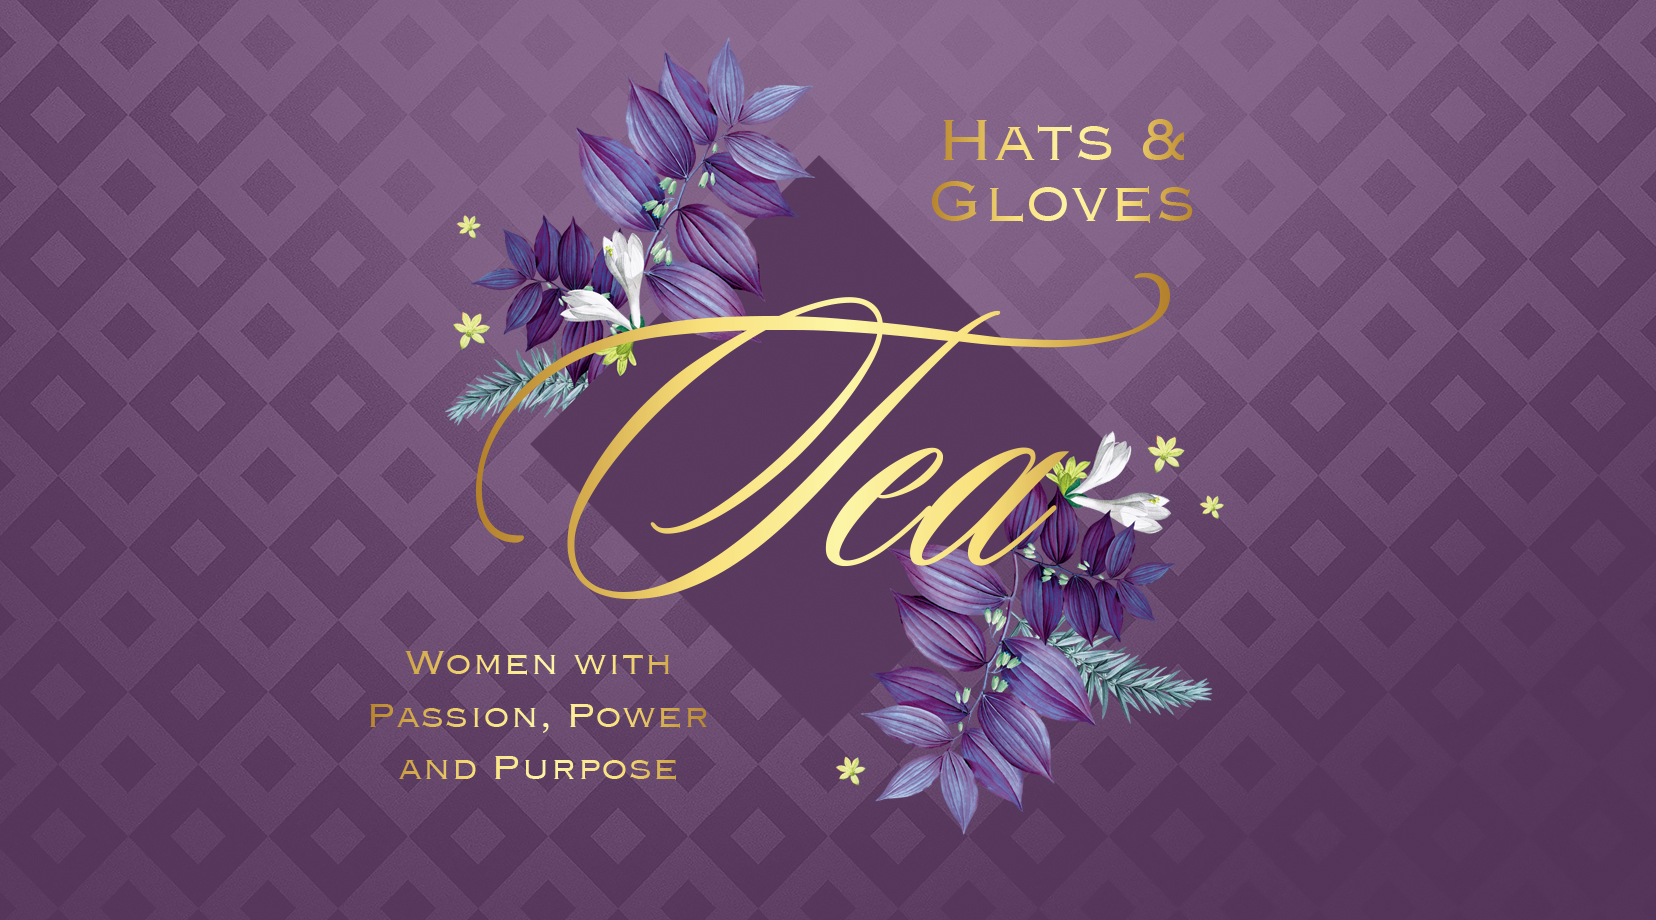 Hats and Gloves Tea